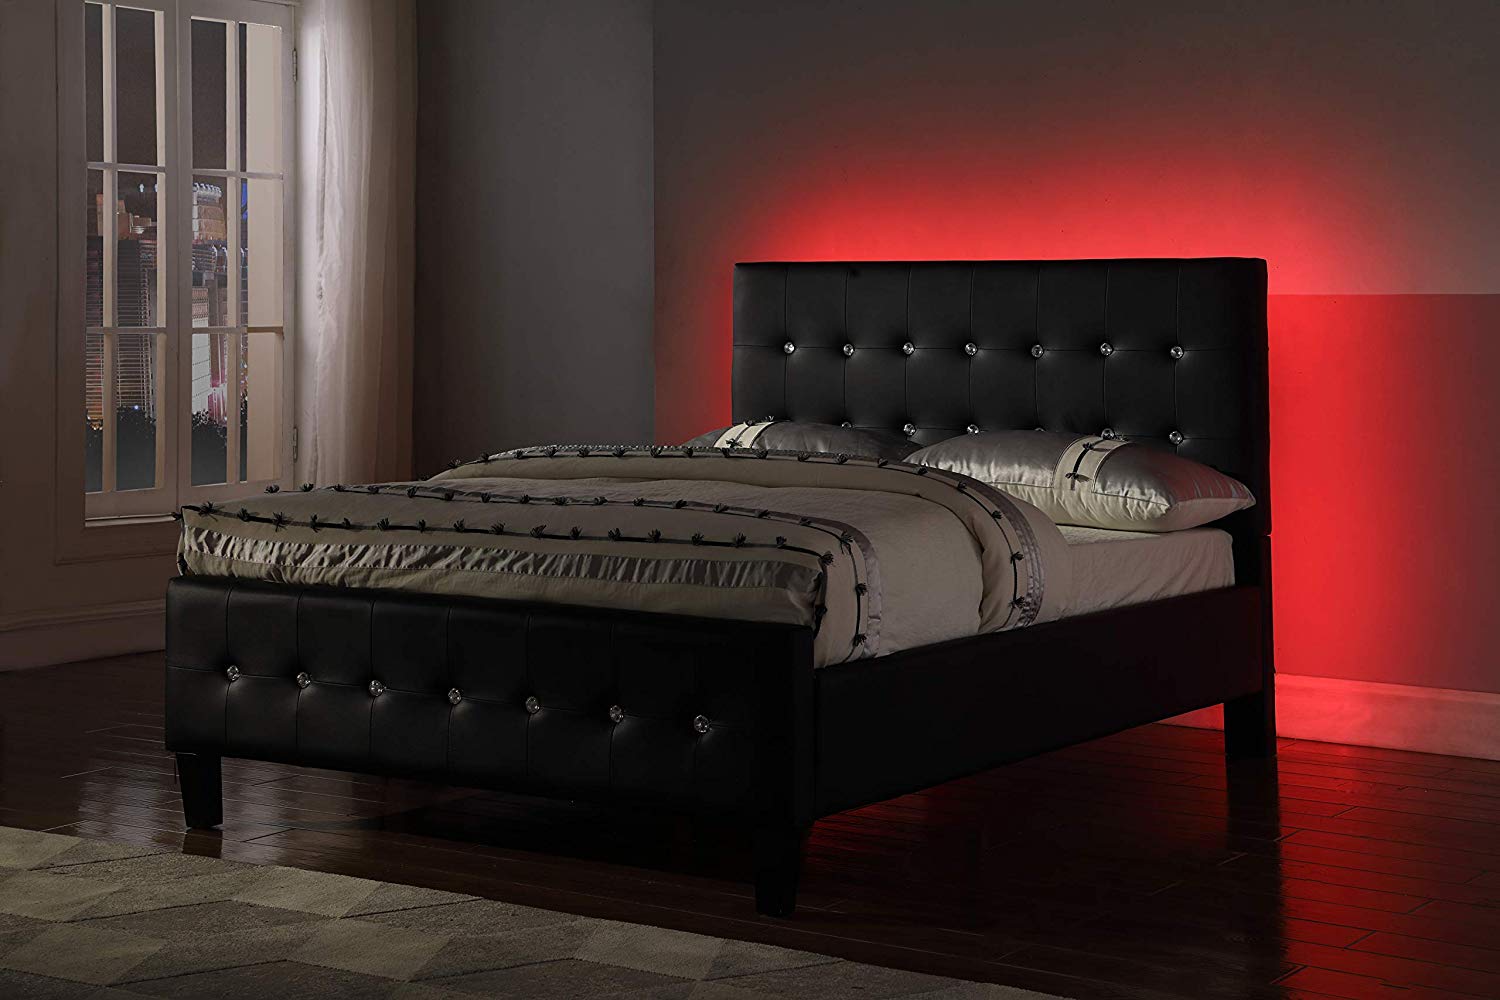 Best Platform Bed with LED Lights | Change Up to 16 Colors by Remote